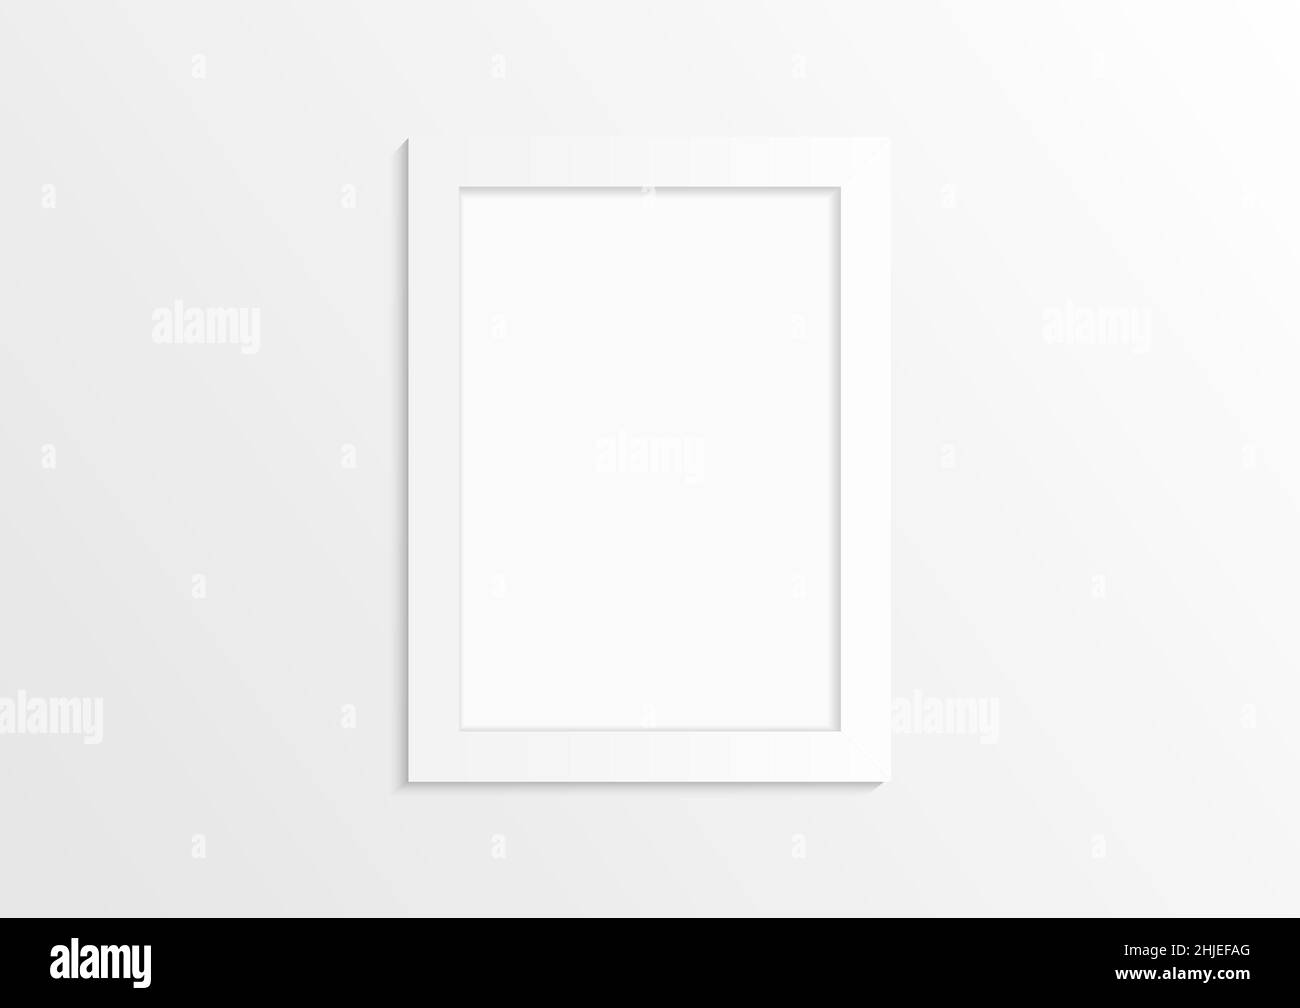 https://c8.alamy.com/comp/2HJEFAG/white-empty-photo-image-frame-mock-up-for-composition-object-with-shadow-realistic-vertical-isolated-template-vector-illustrator-2HJEFAG.jpg